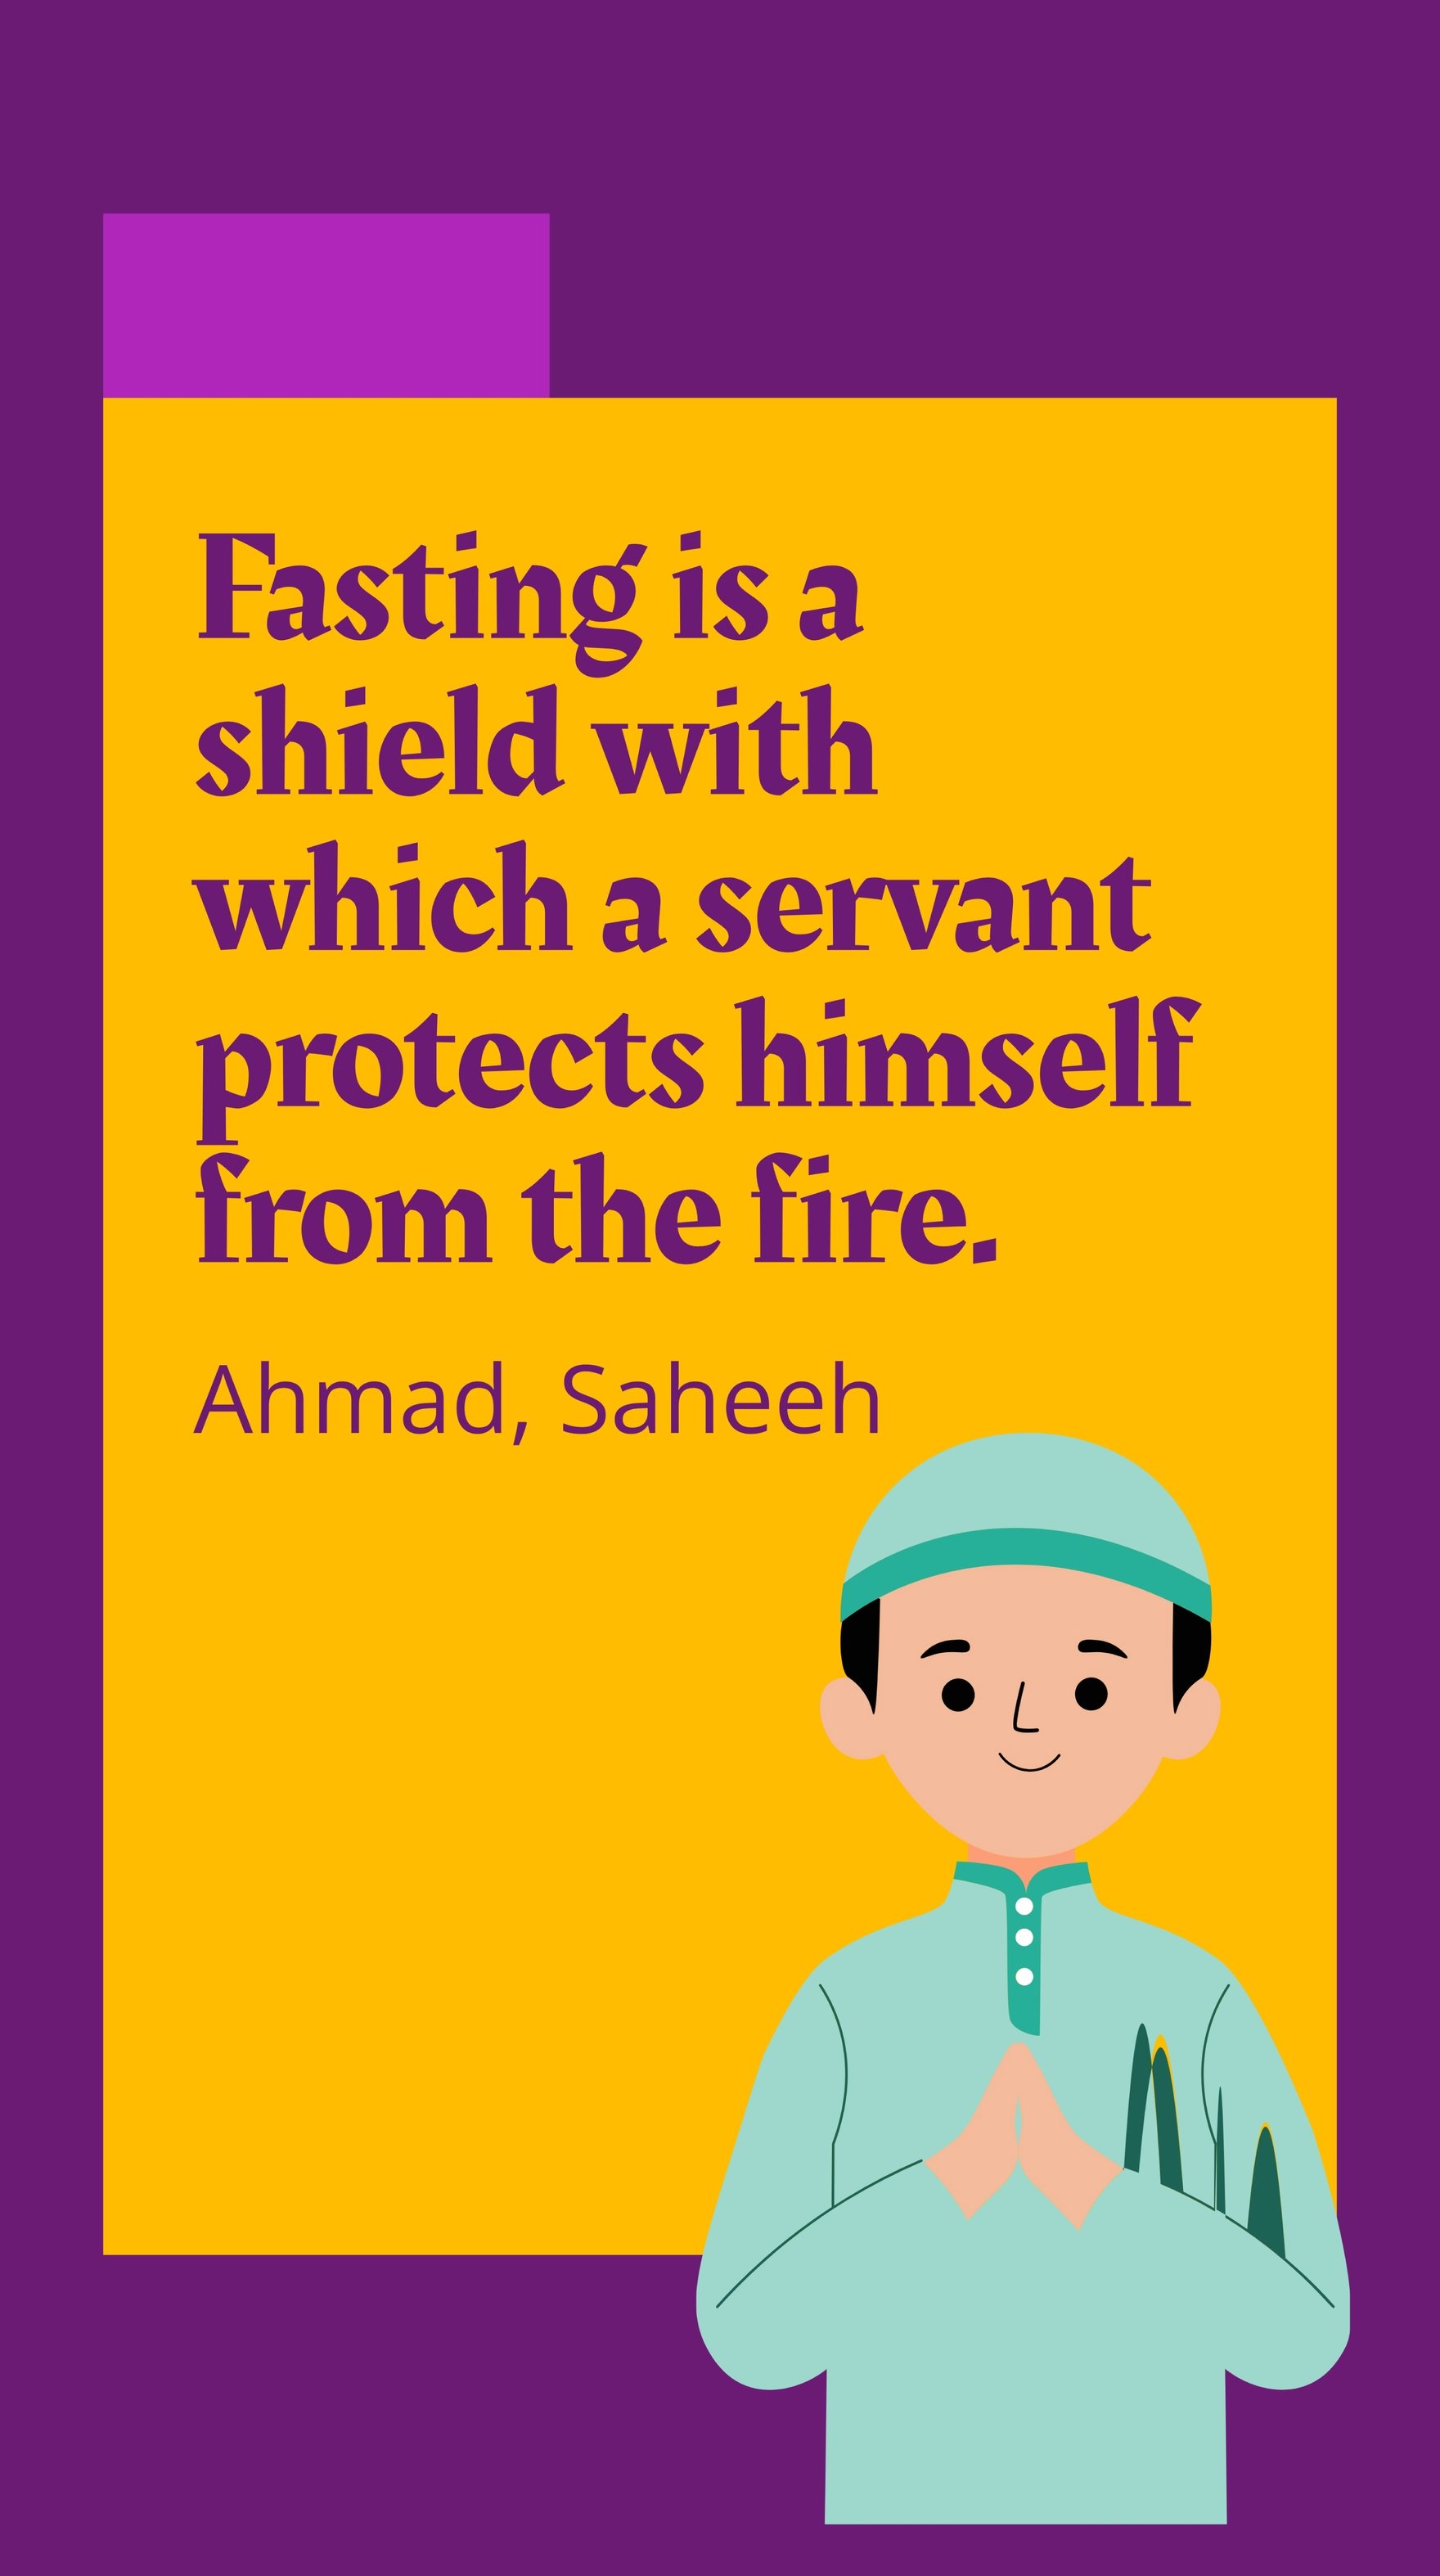 Free Ahmad, Saheeh - Fasting is a shield with which a servant protects himself from the fire.